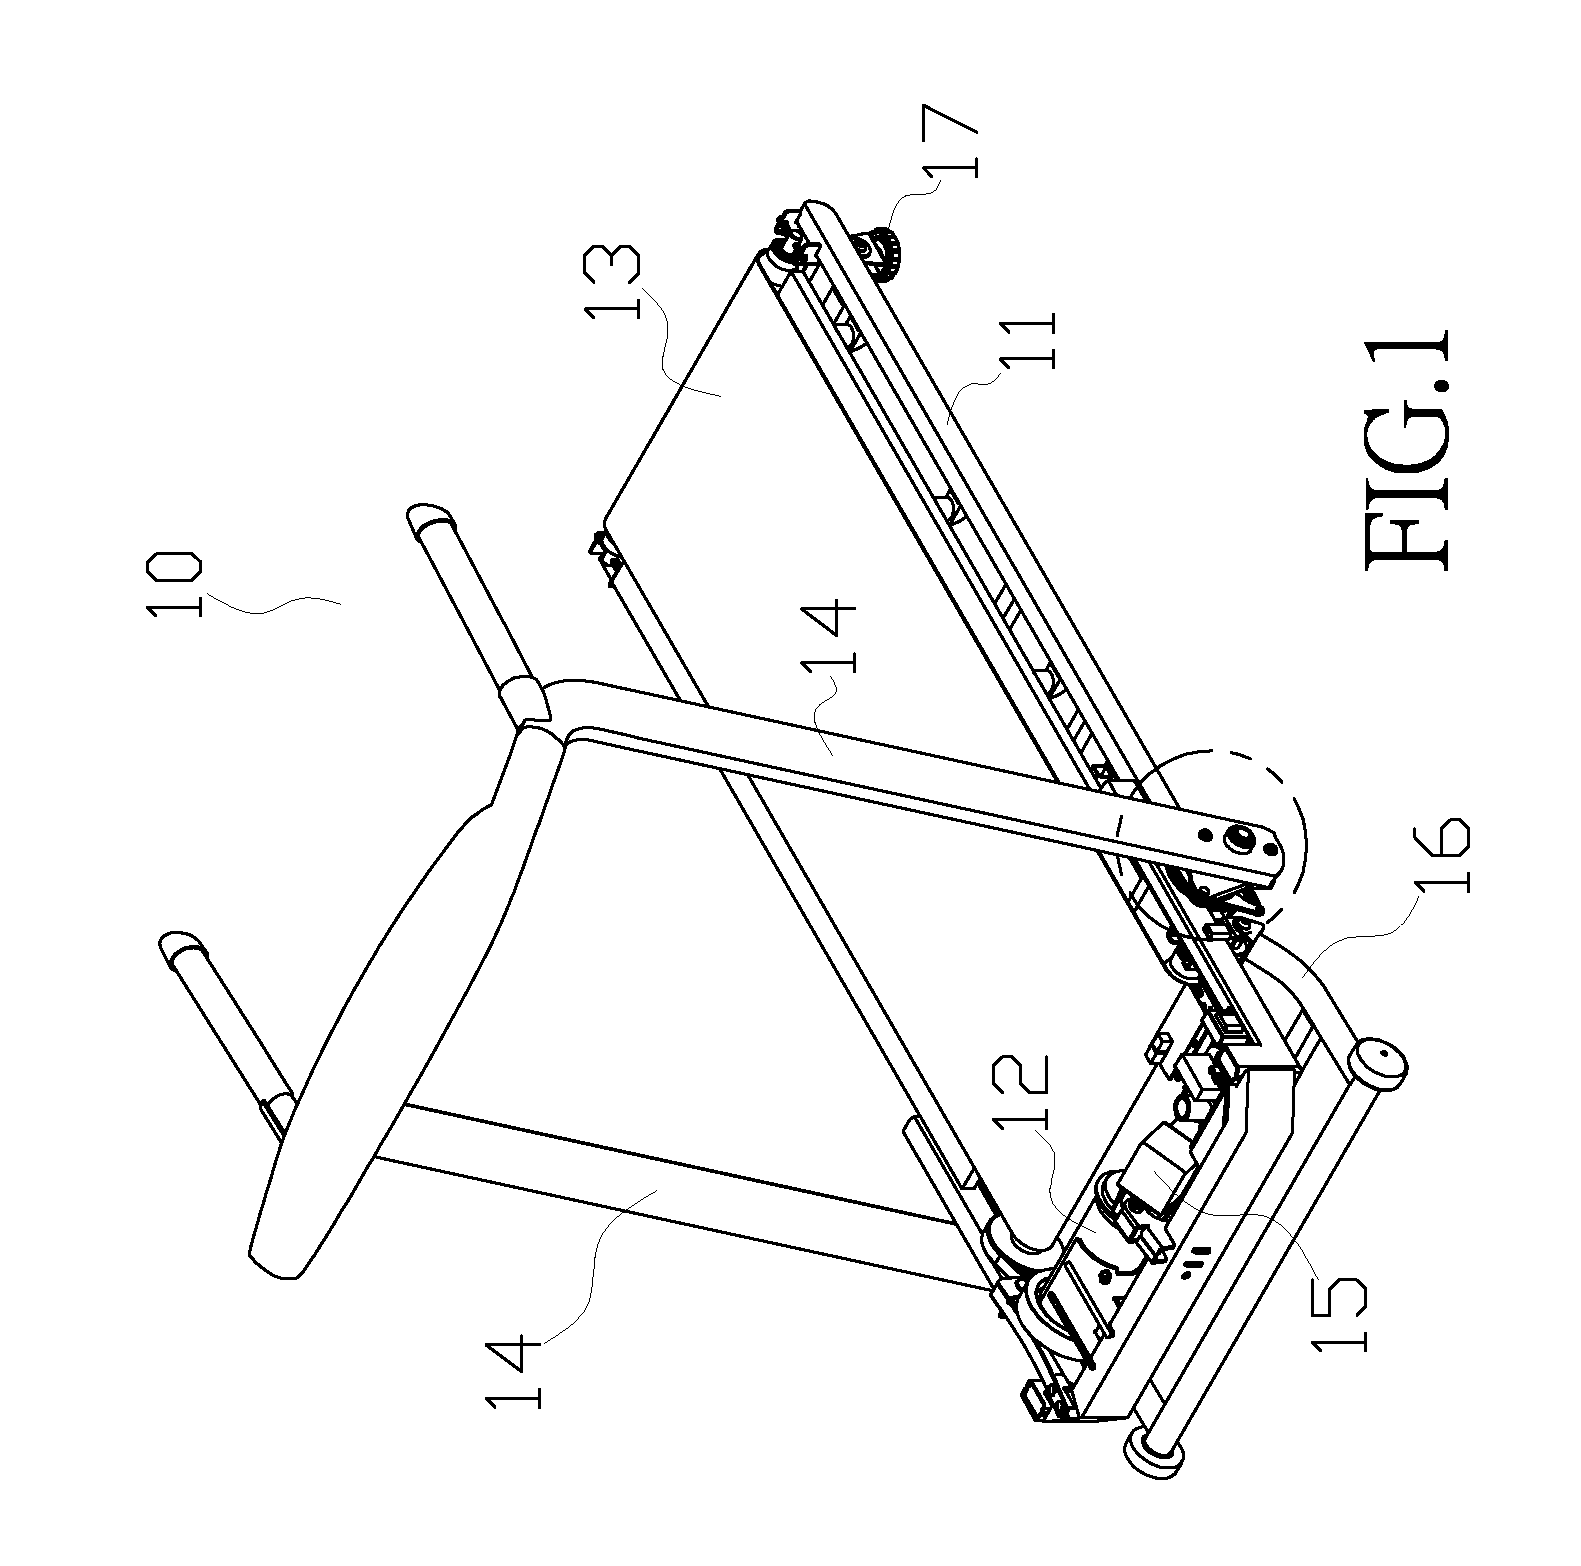 Electric treadmill with a folding mechanism